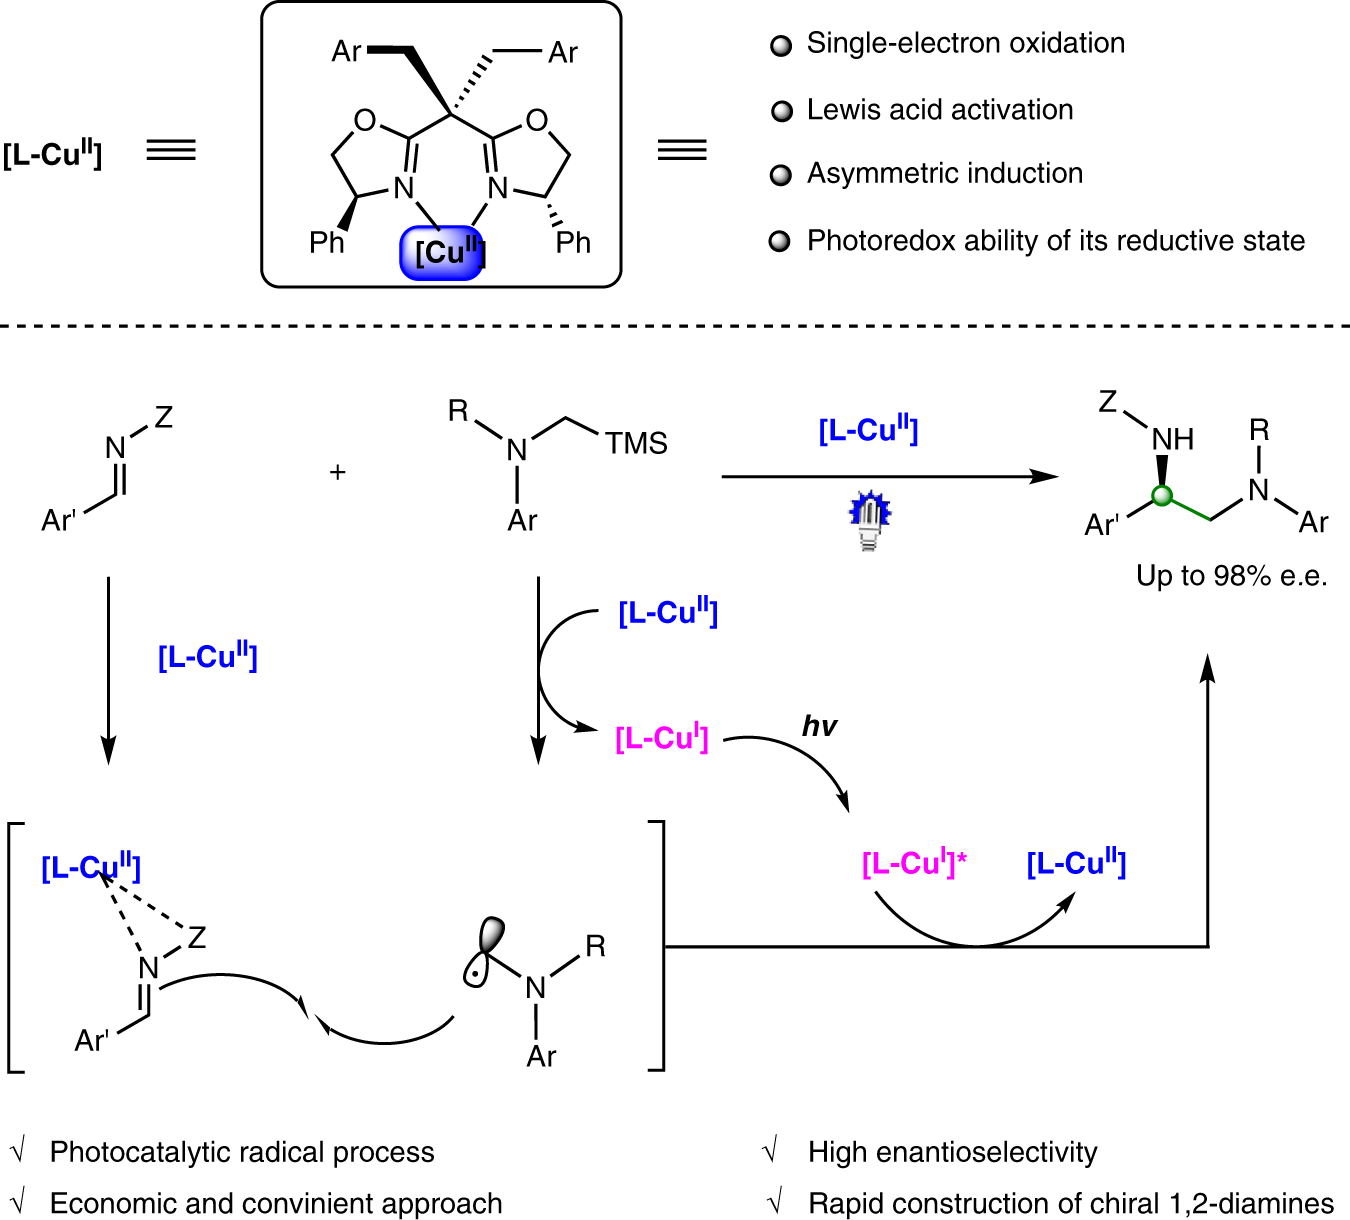 Photocatalytic Enantioselective A Aminoalkylation Of Acyclic Imine Derivatives By A Chiral Copper Catalyst Nature Communications